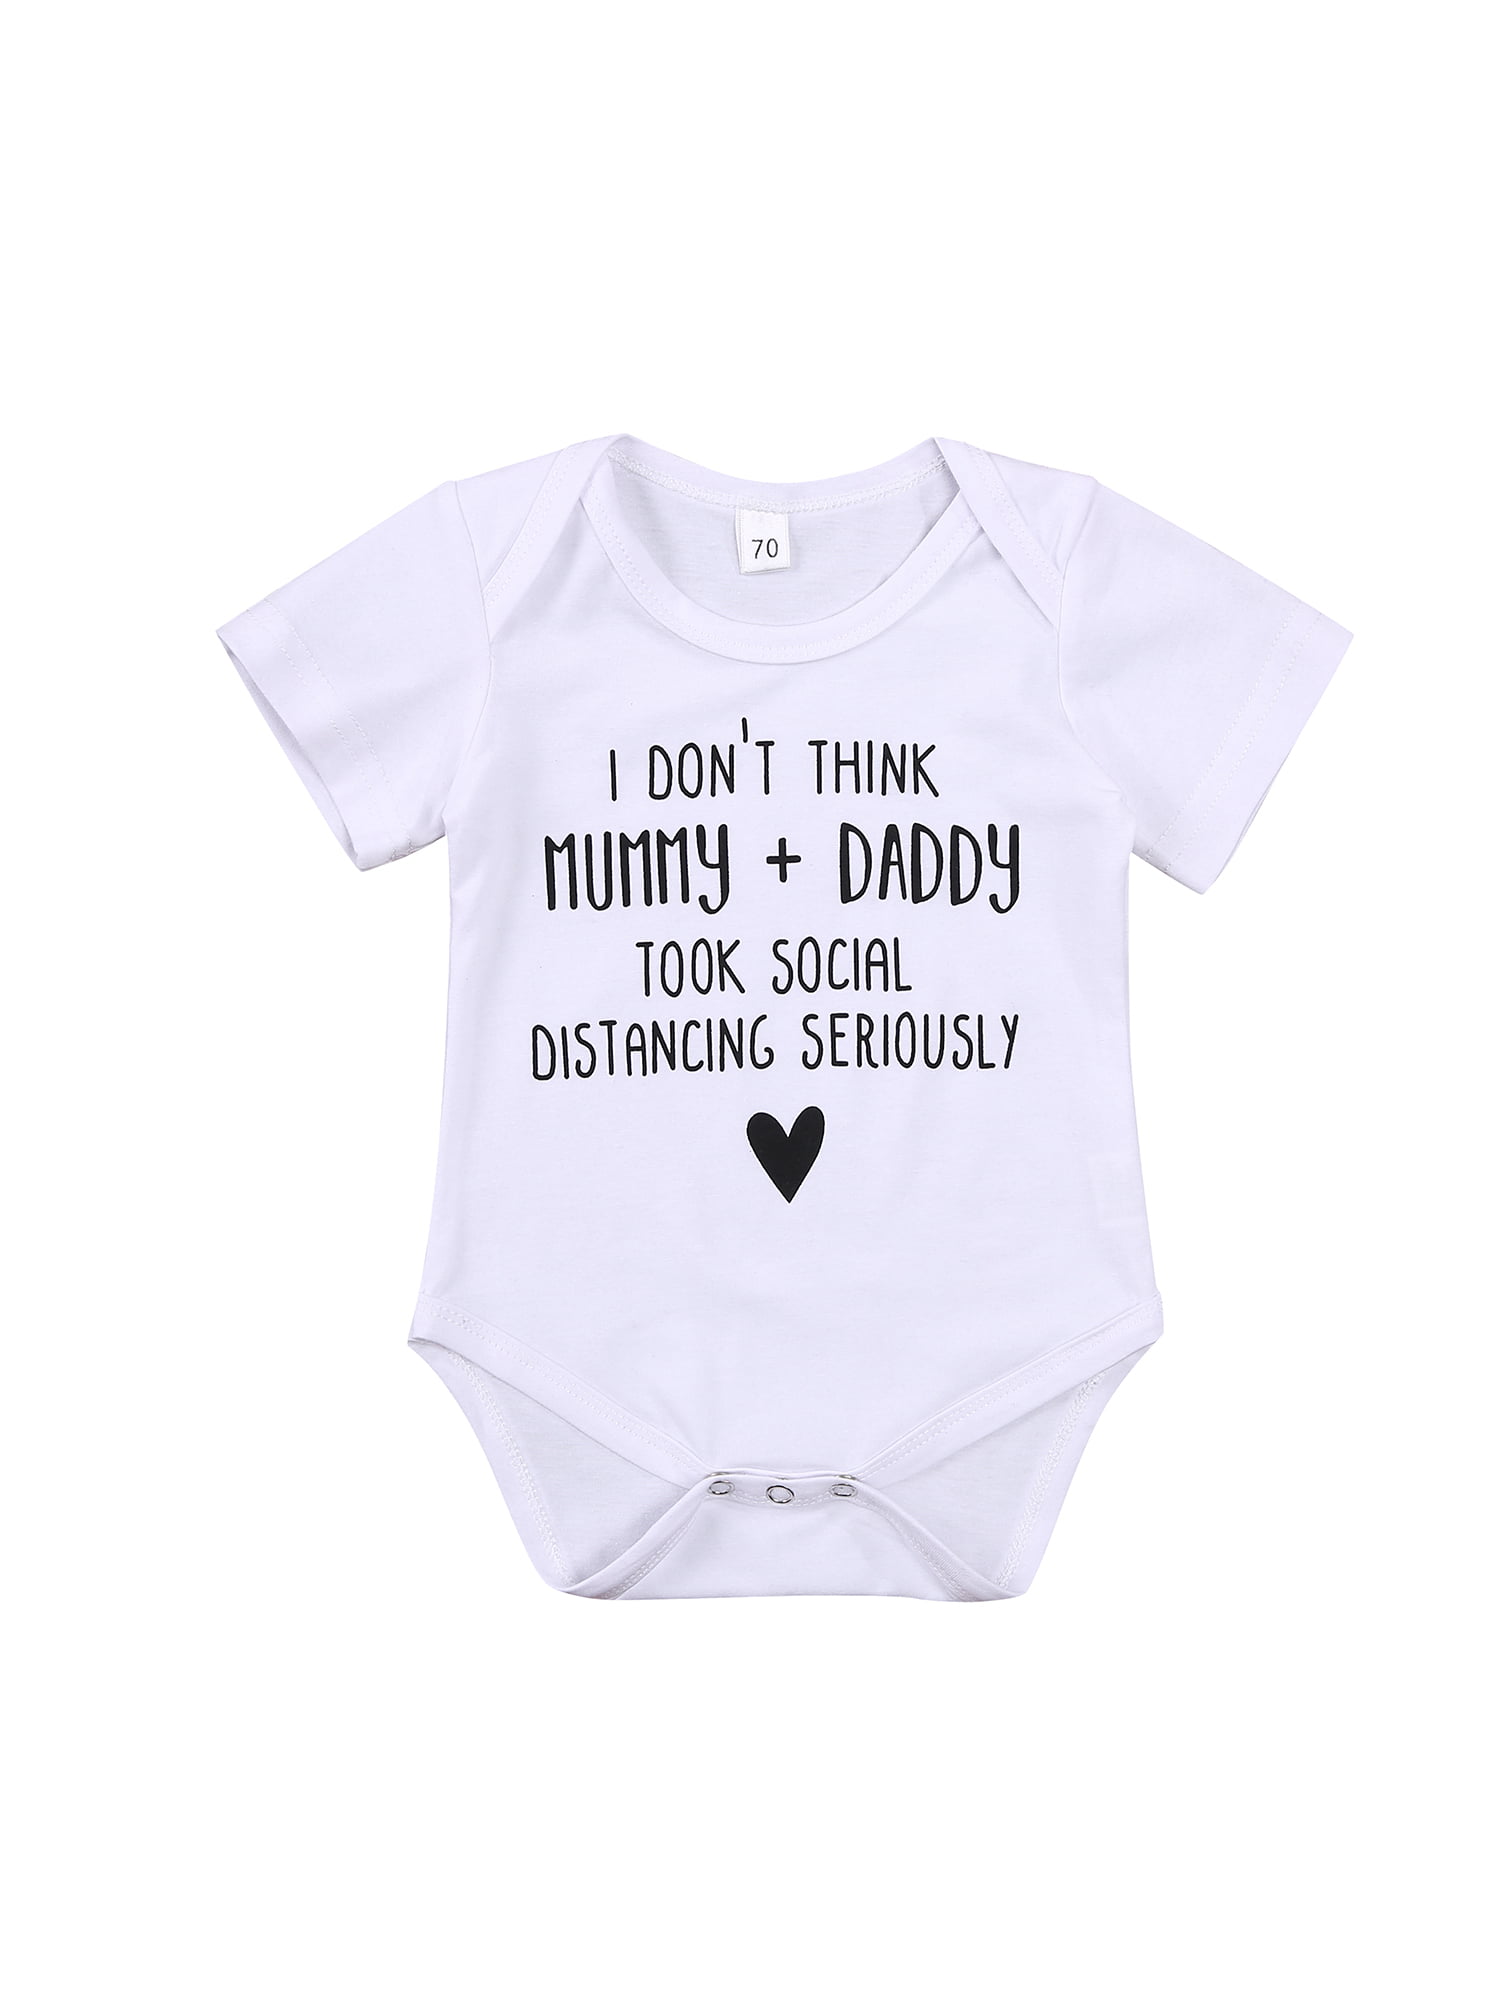 Mom+Dad Me Baby Boys Girls T-Shirt Funny Letter Print Tee Tops Round Neck Newborn Summer Clothes